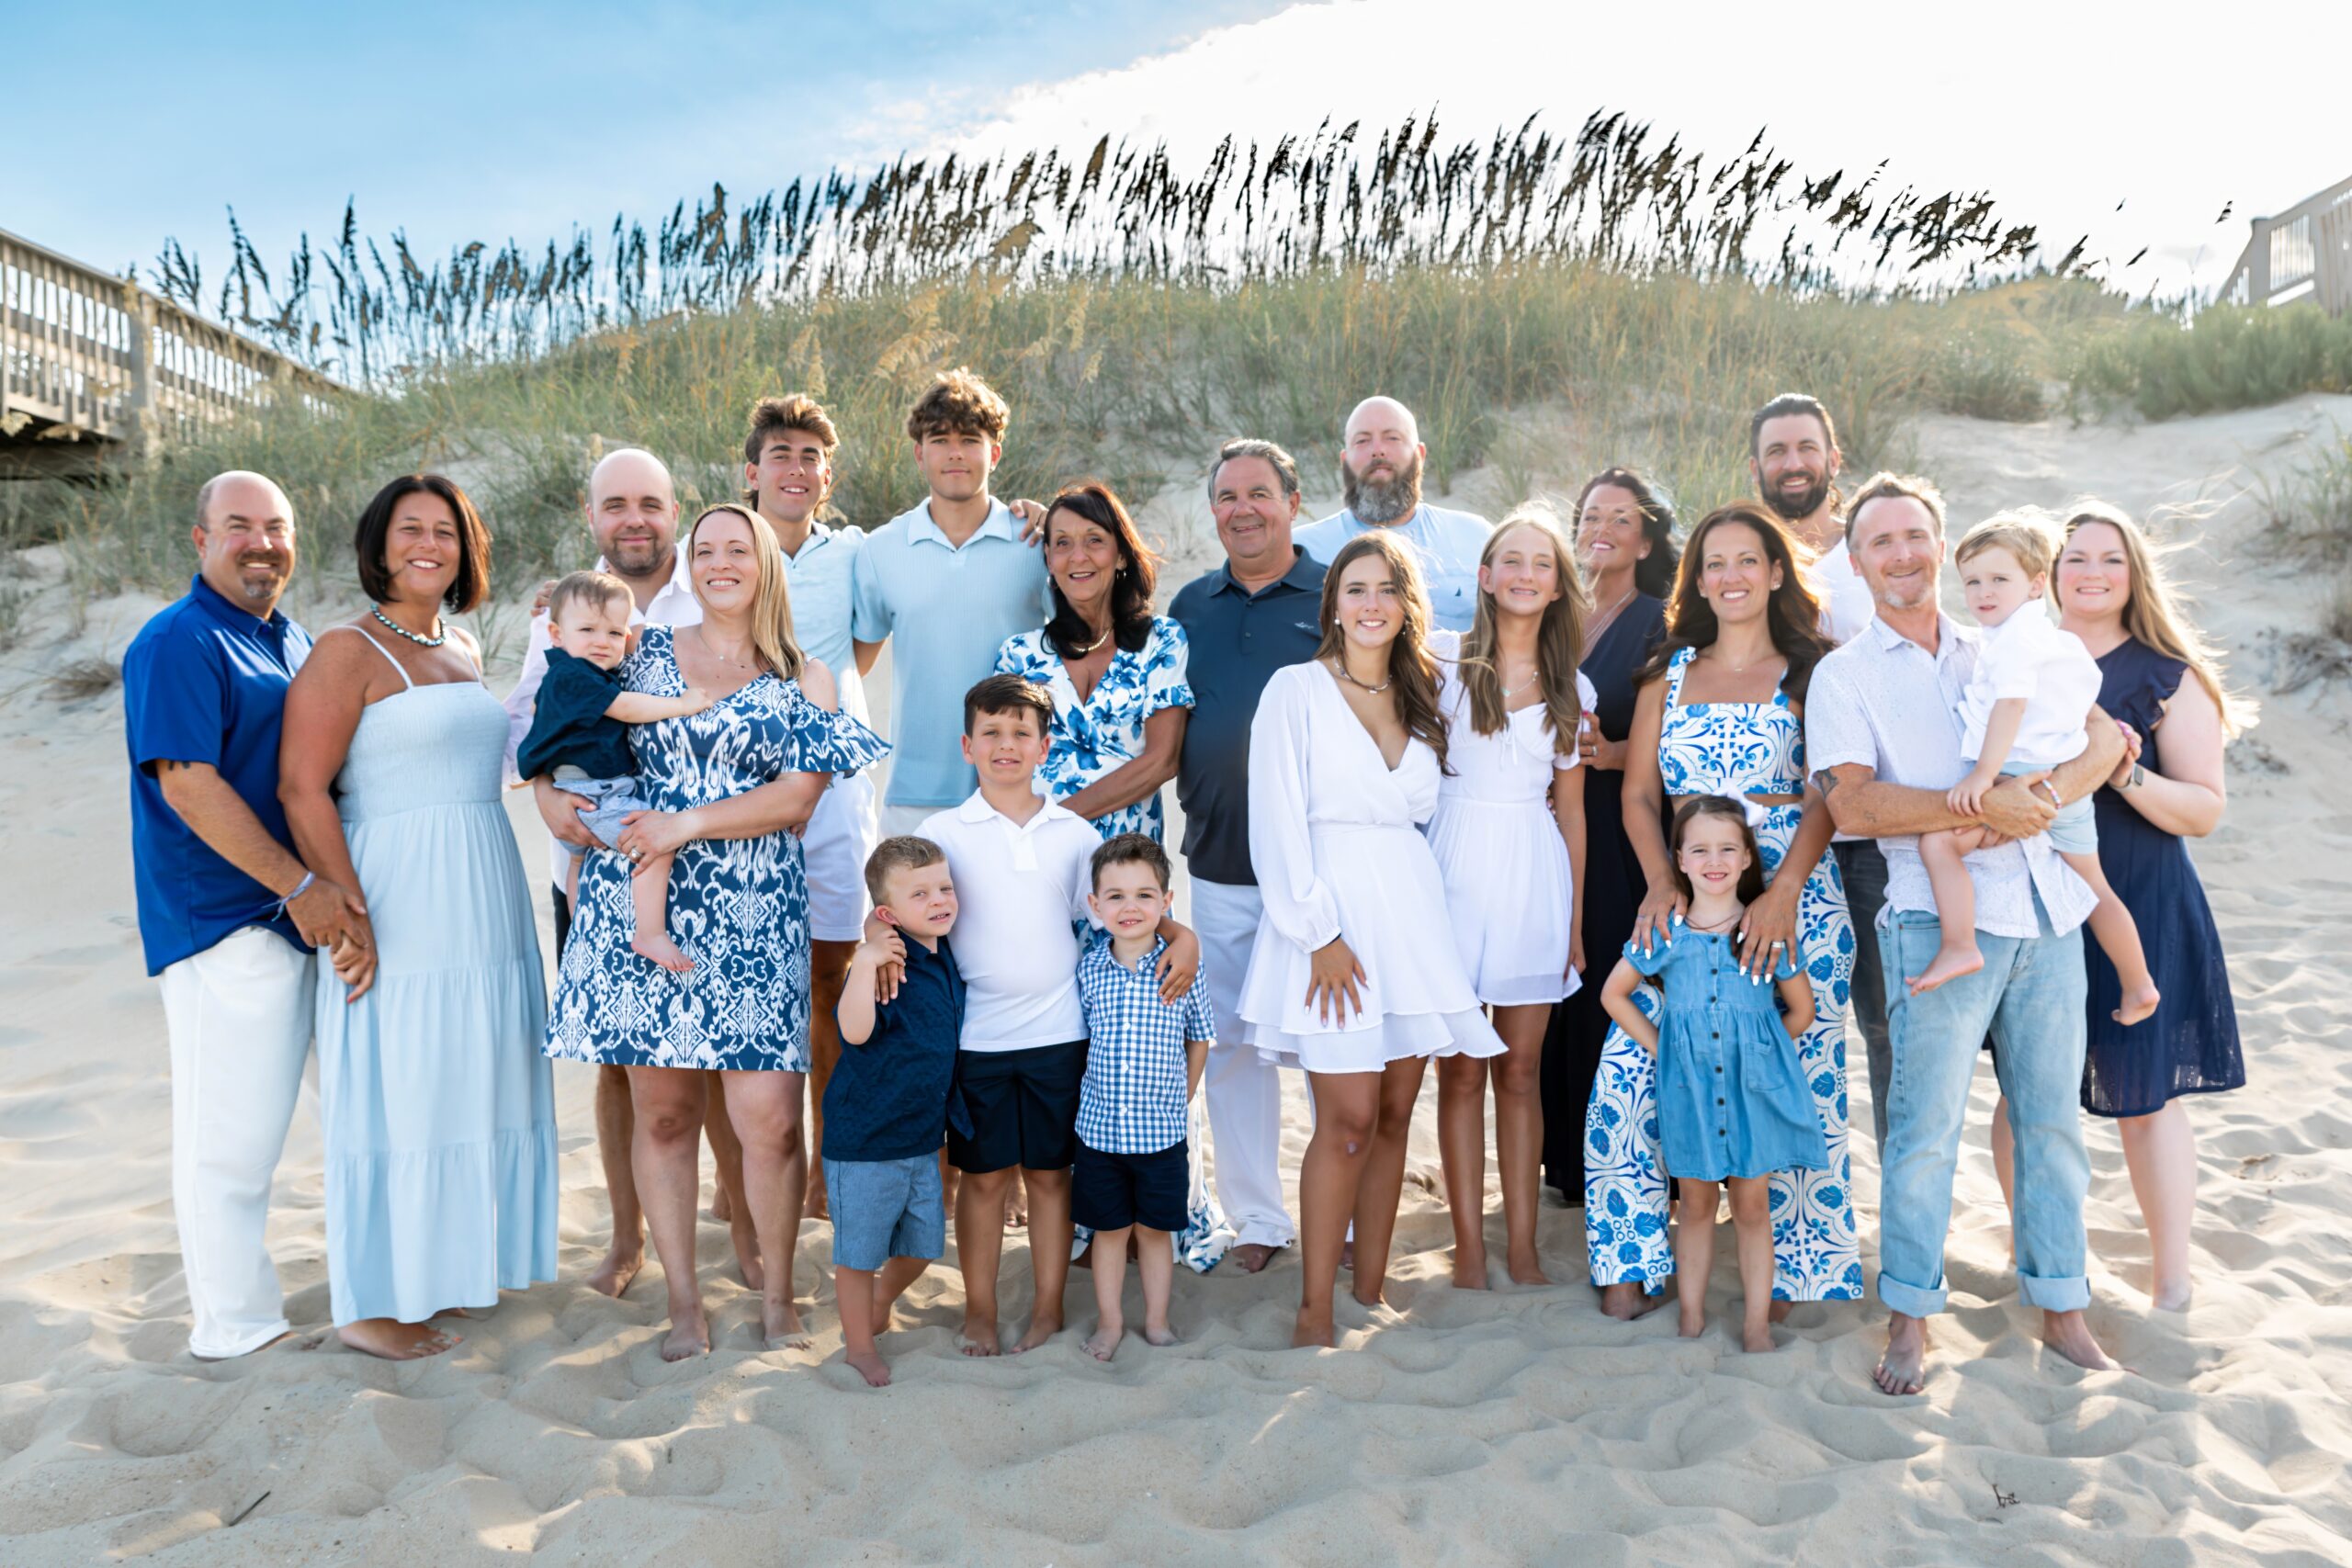 obx family beach photography and weddings mary ks photography obxfamily obx